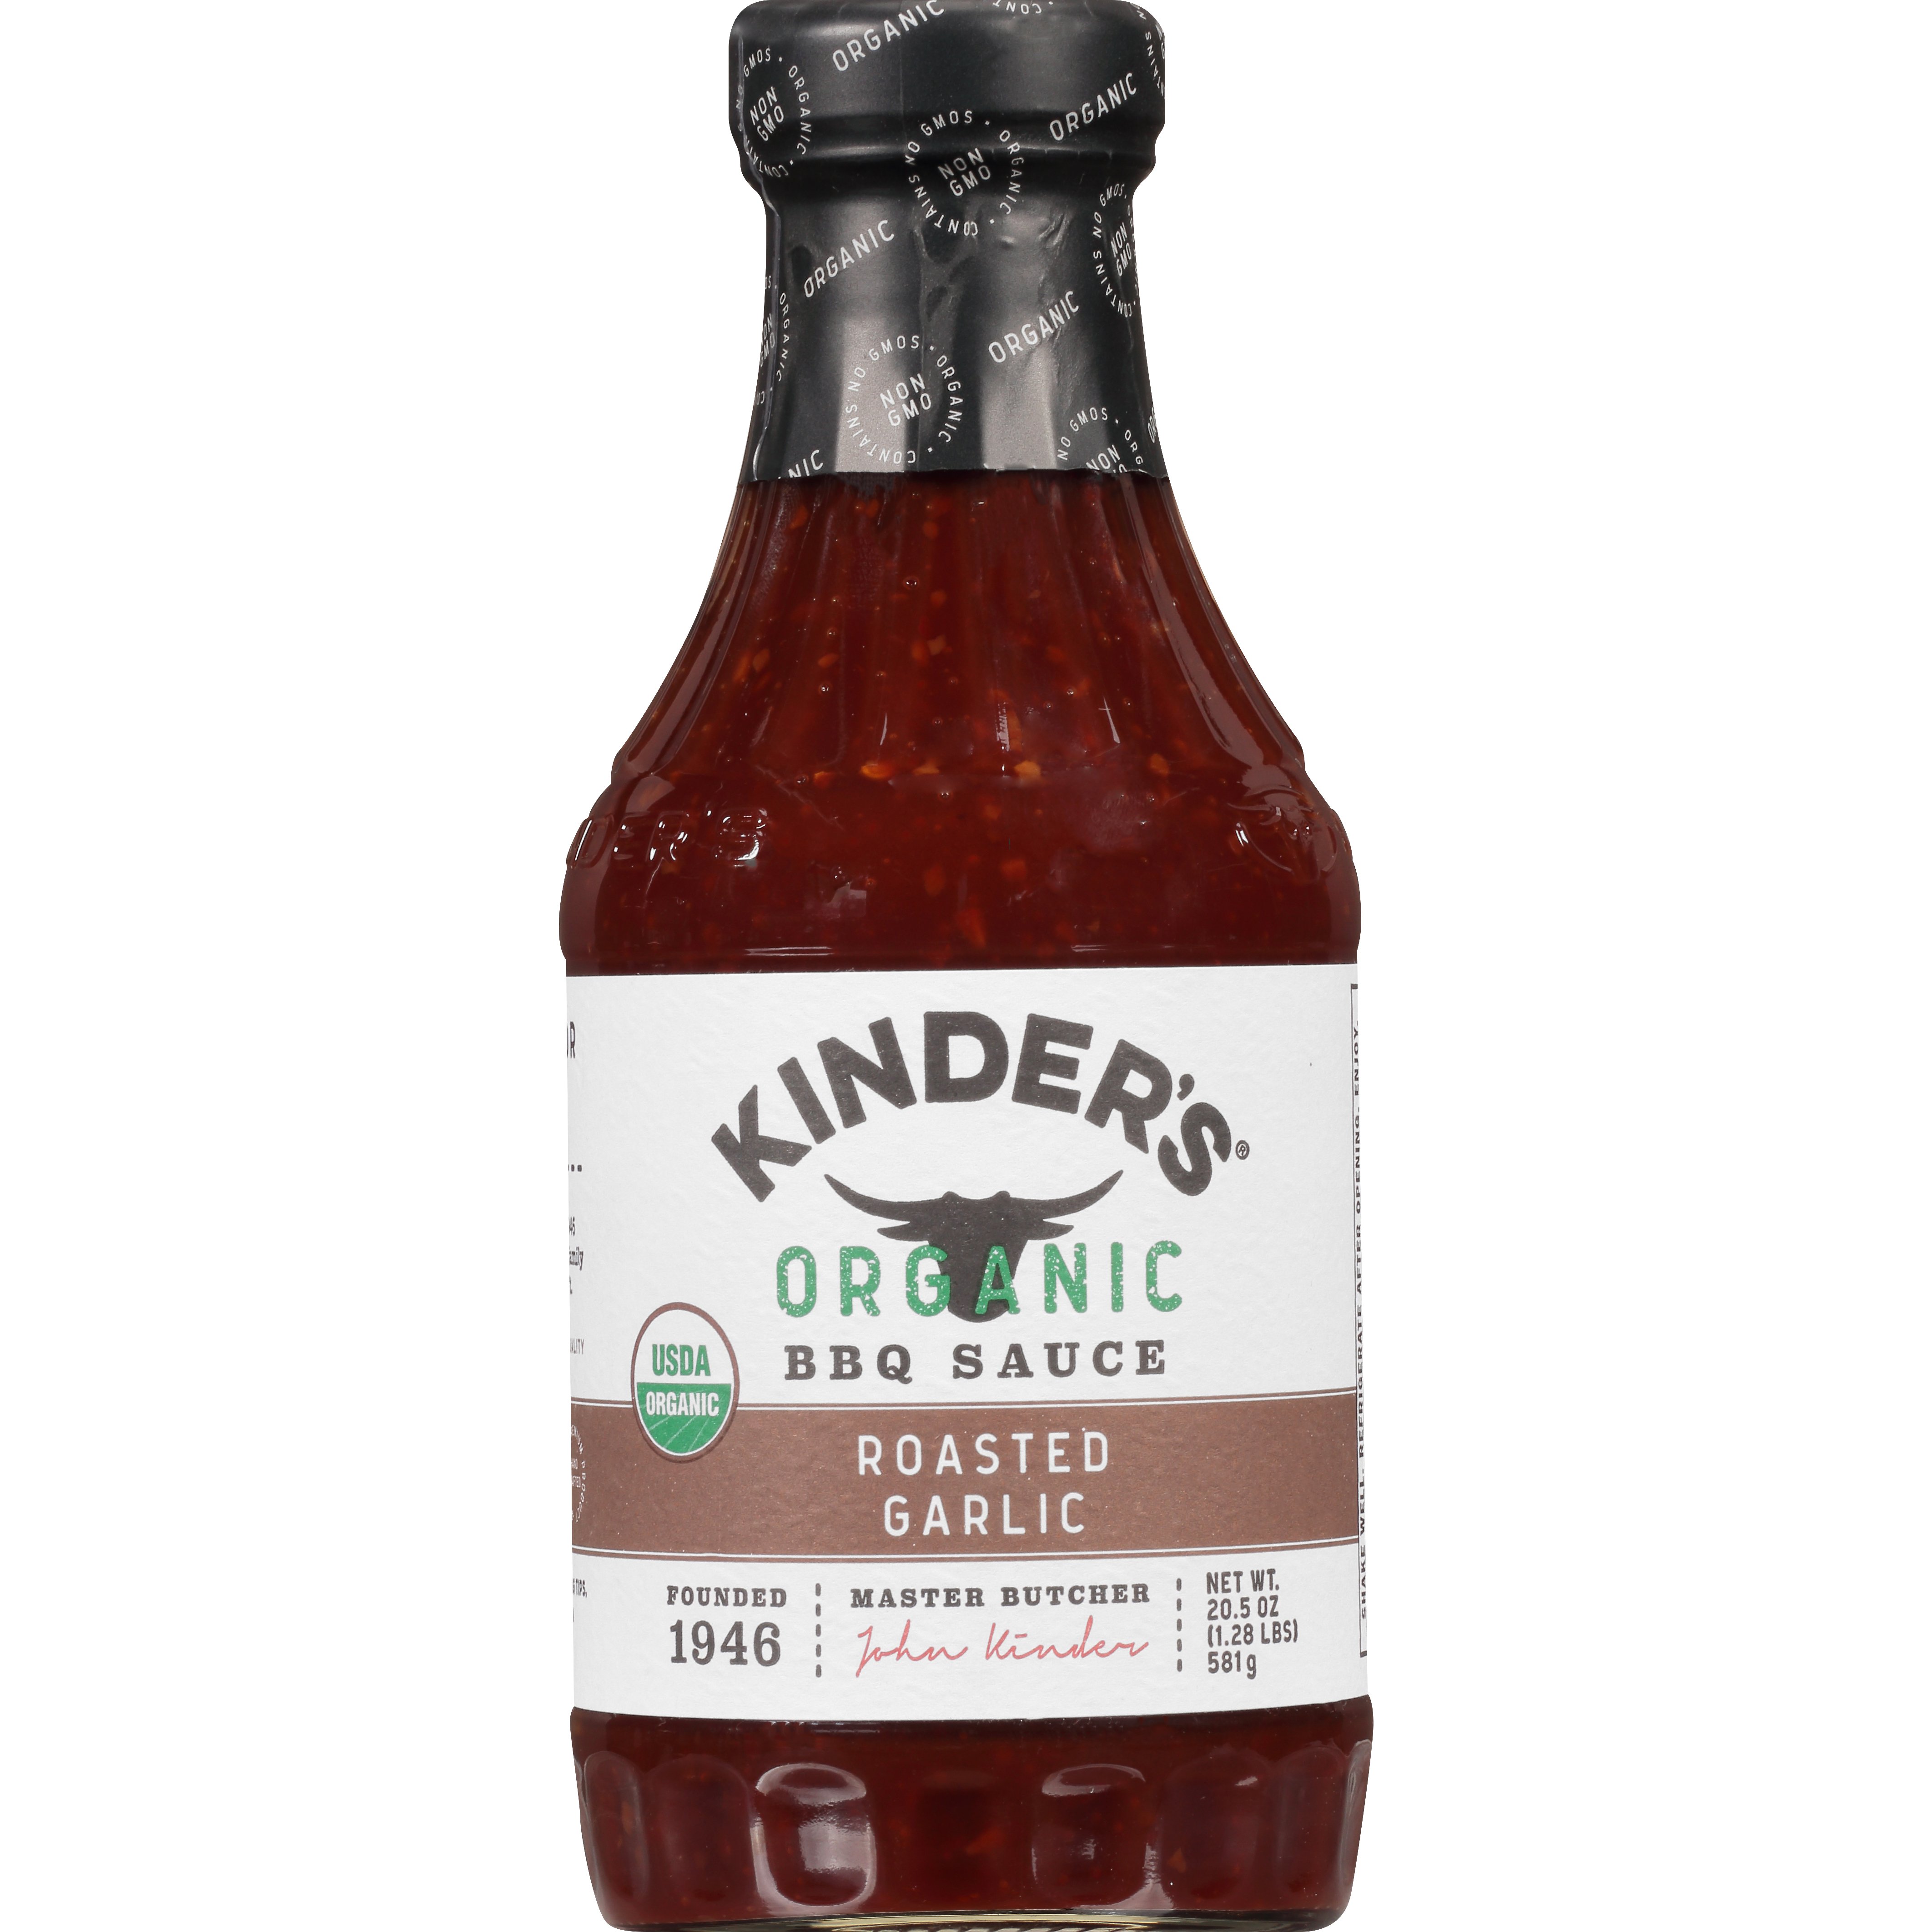 We Tried 15 BBQ Sauces. These Are the Best - CNET